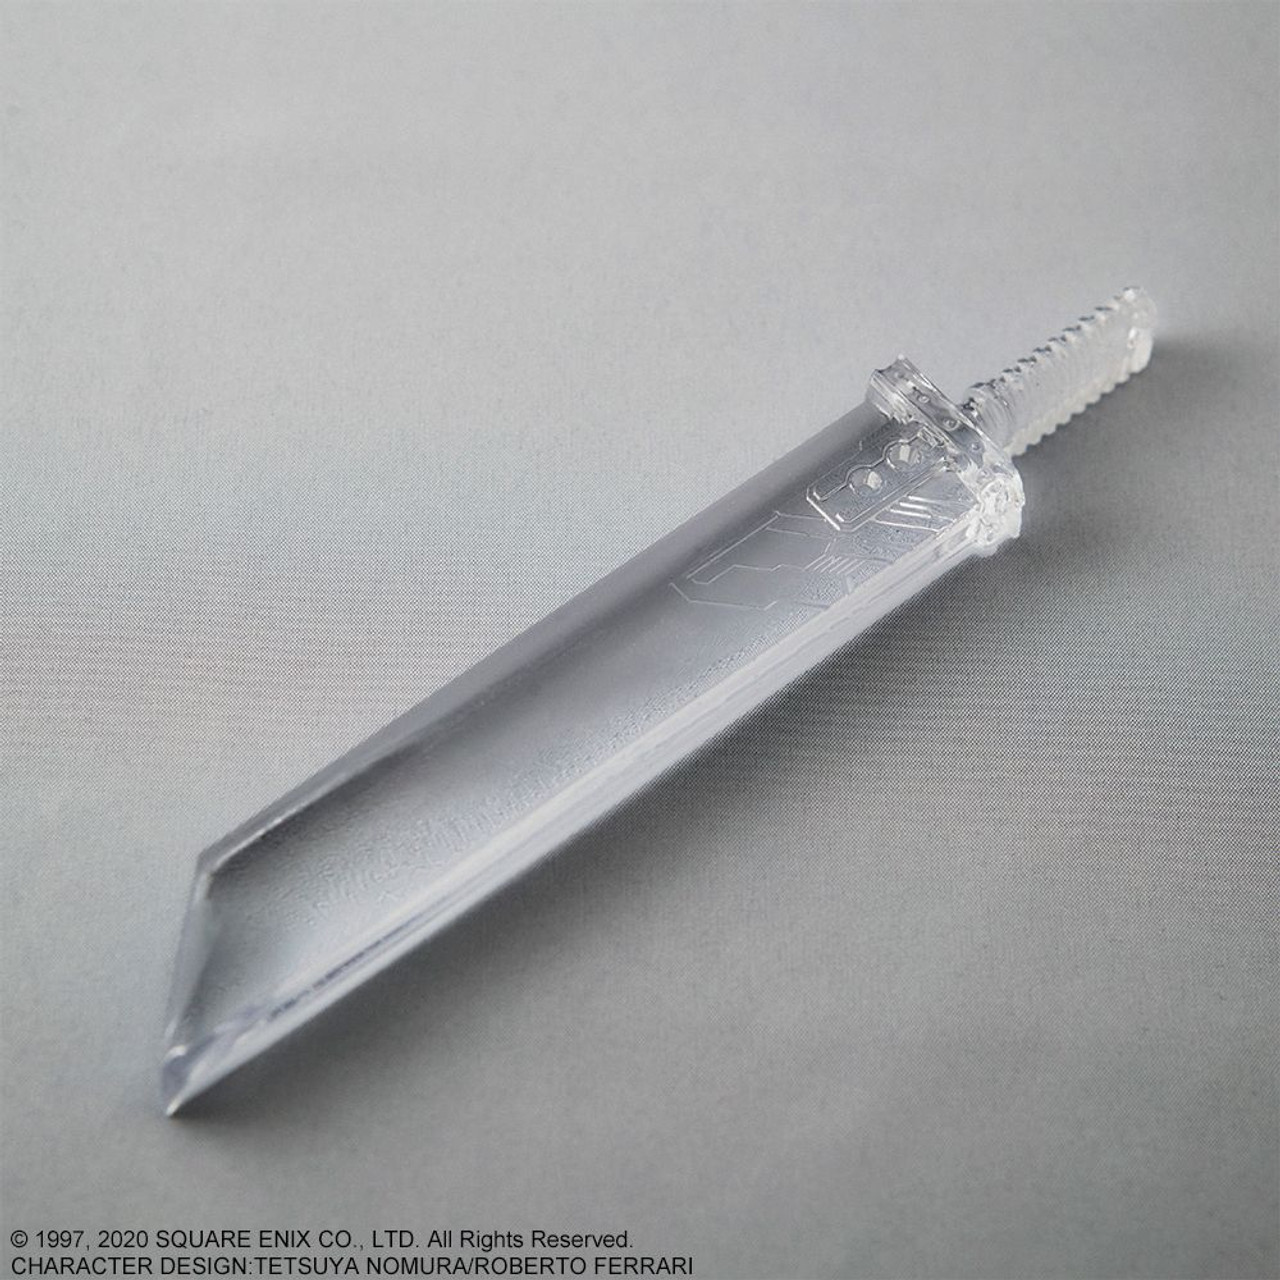 FINAL FANTASY VII REMAKE SILICONE ICE TRAY - BUSTER SWORD